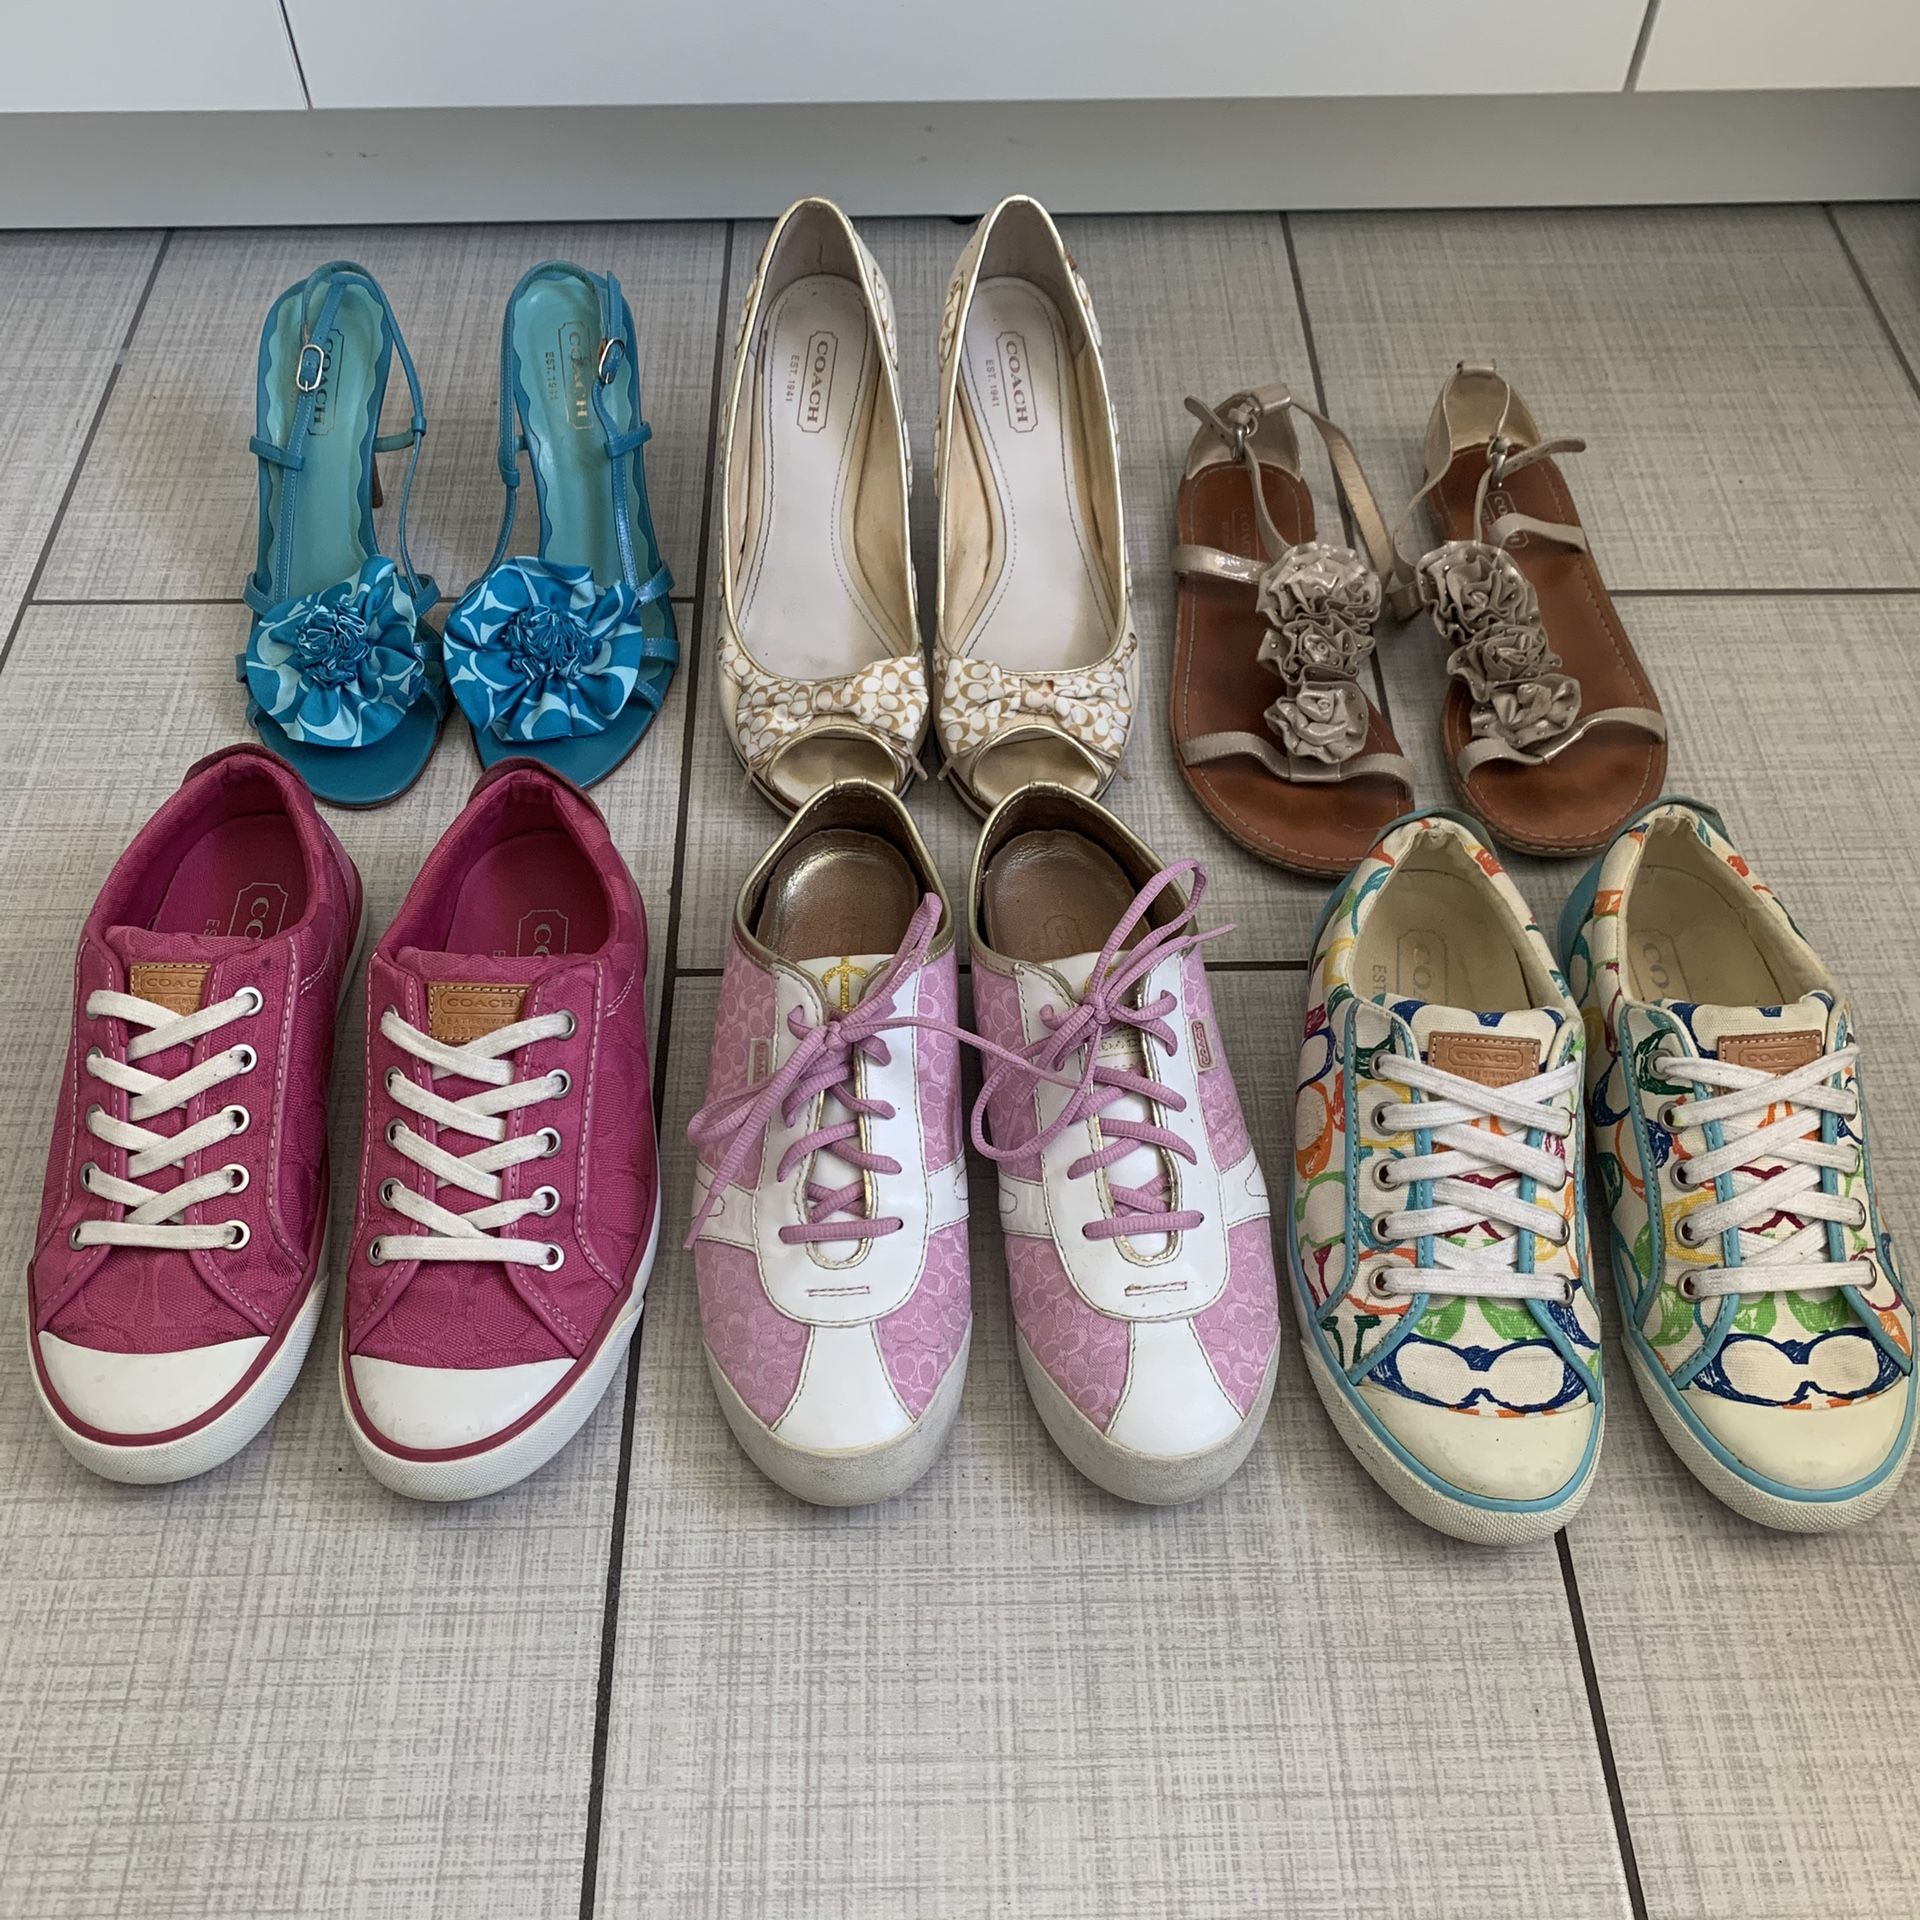 Big Bundle is Women’s Shoes - Size 8 - 24 brand name pairs